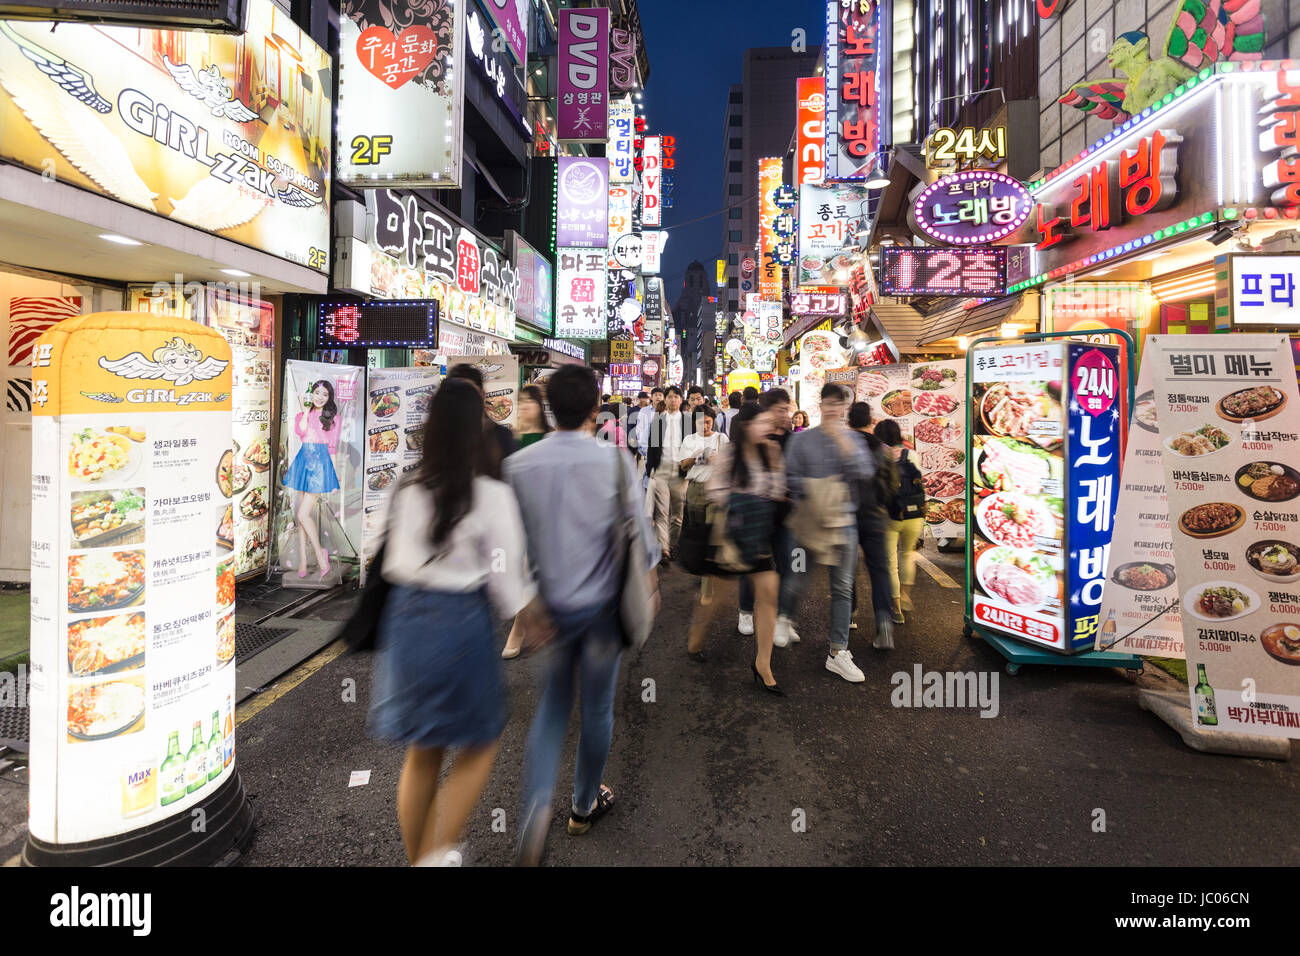 SEOUL, SOUTH KOREA - MAY 13: People, captured with blurred motion, wander in the street of the Insadong shopping and entertainment district lined with Stock Photo